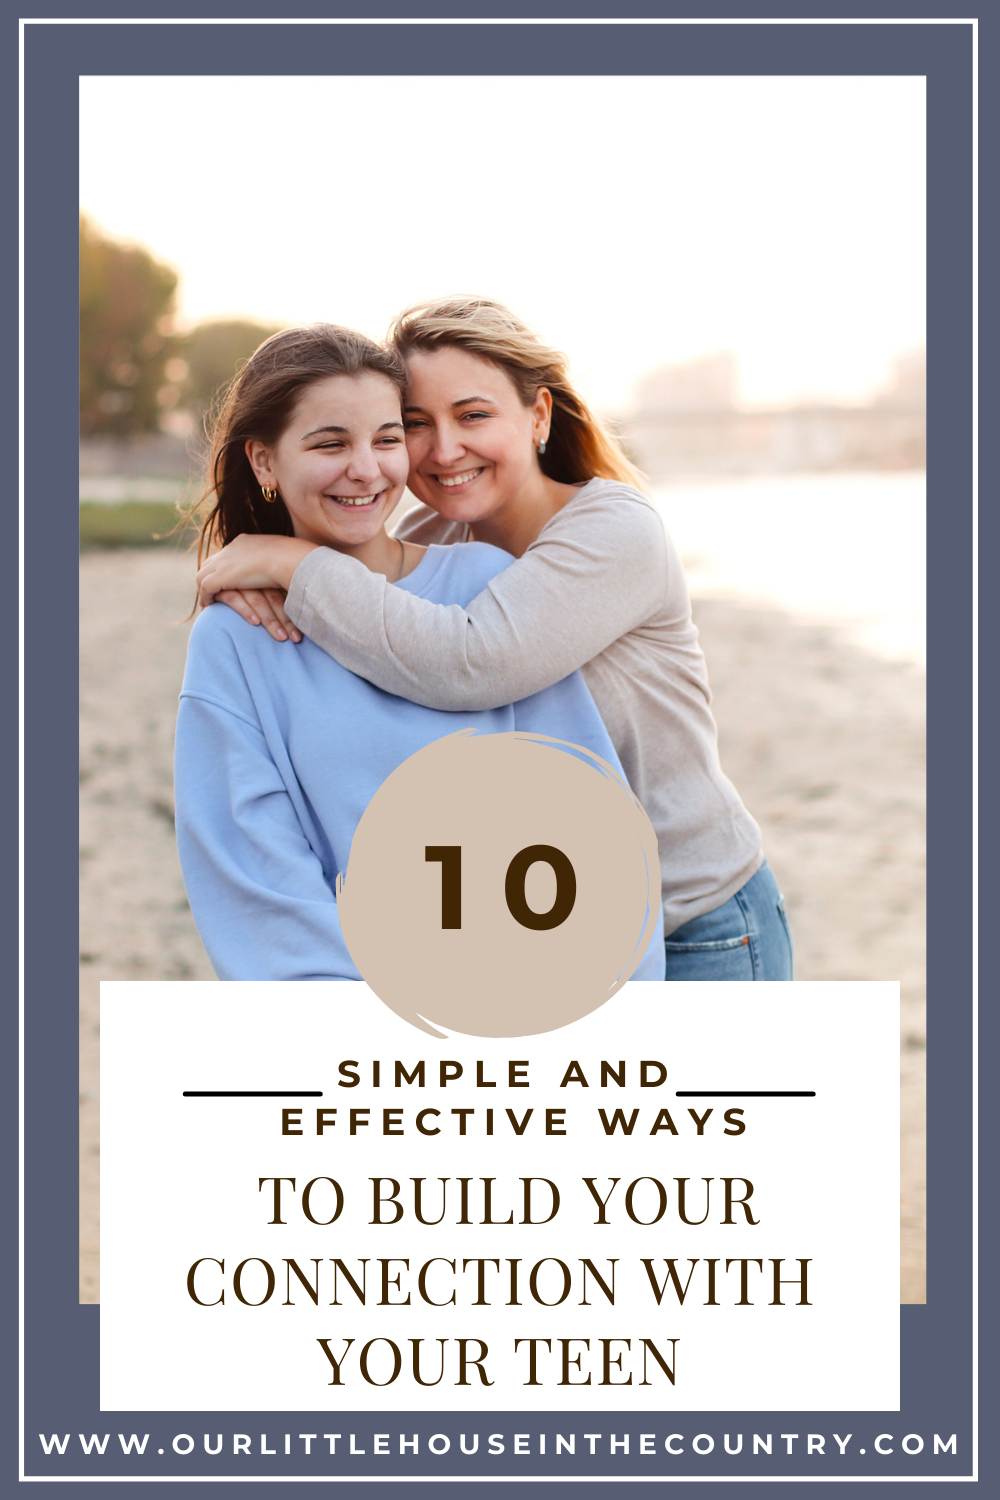 Simple and effective ways to connect with your teenage child